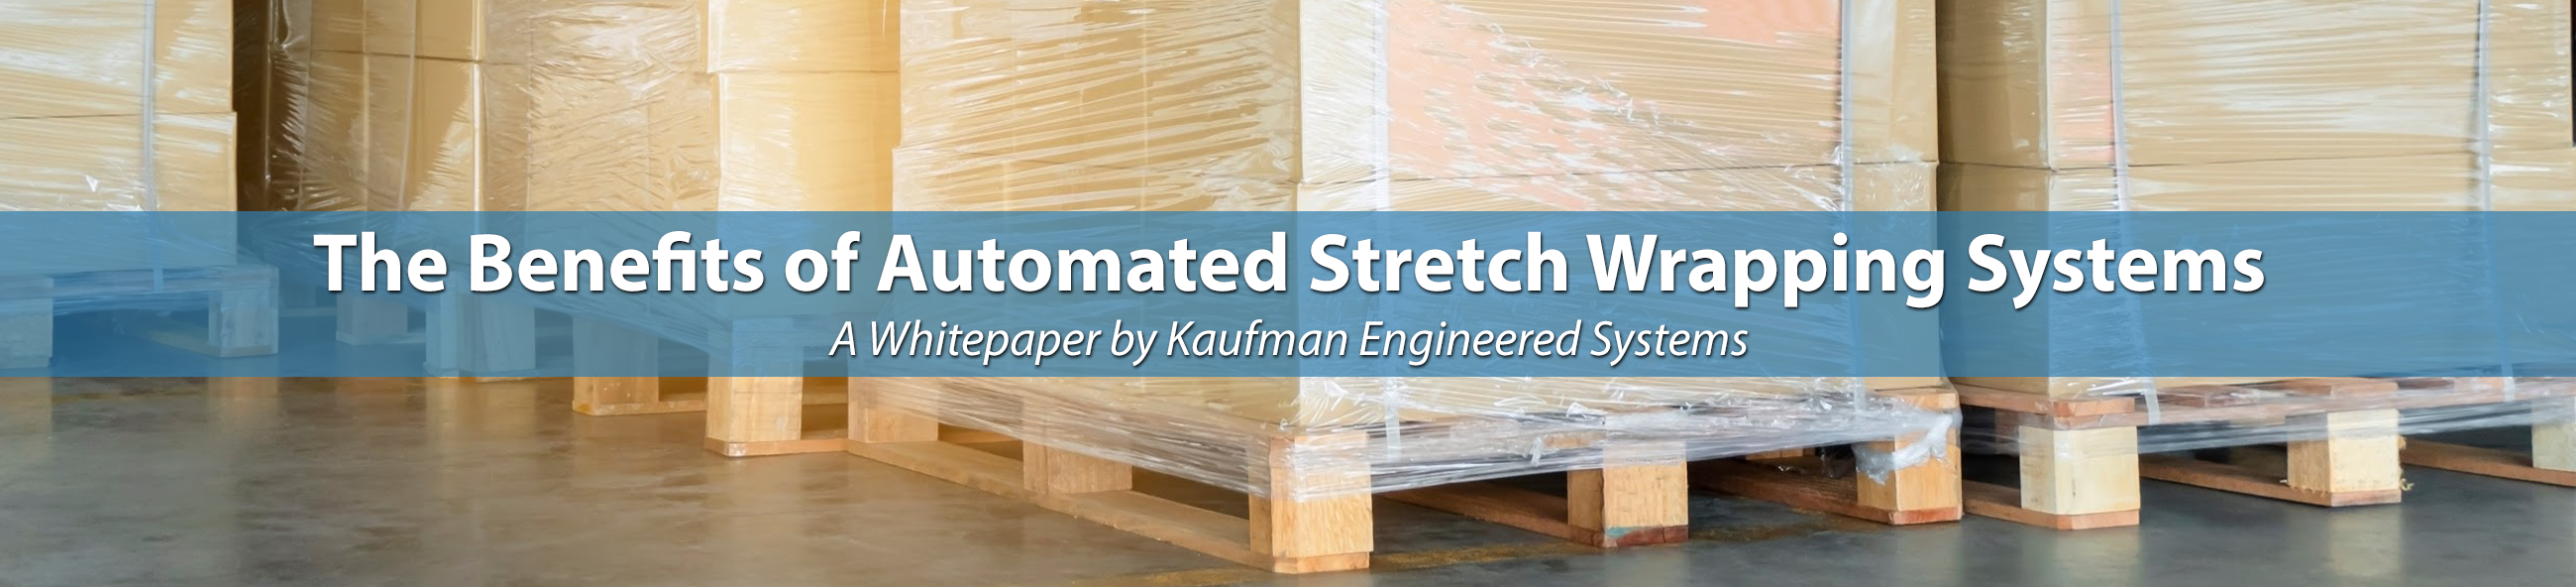 Benefits of Automated Stretch Wrappers